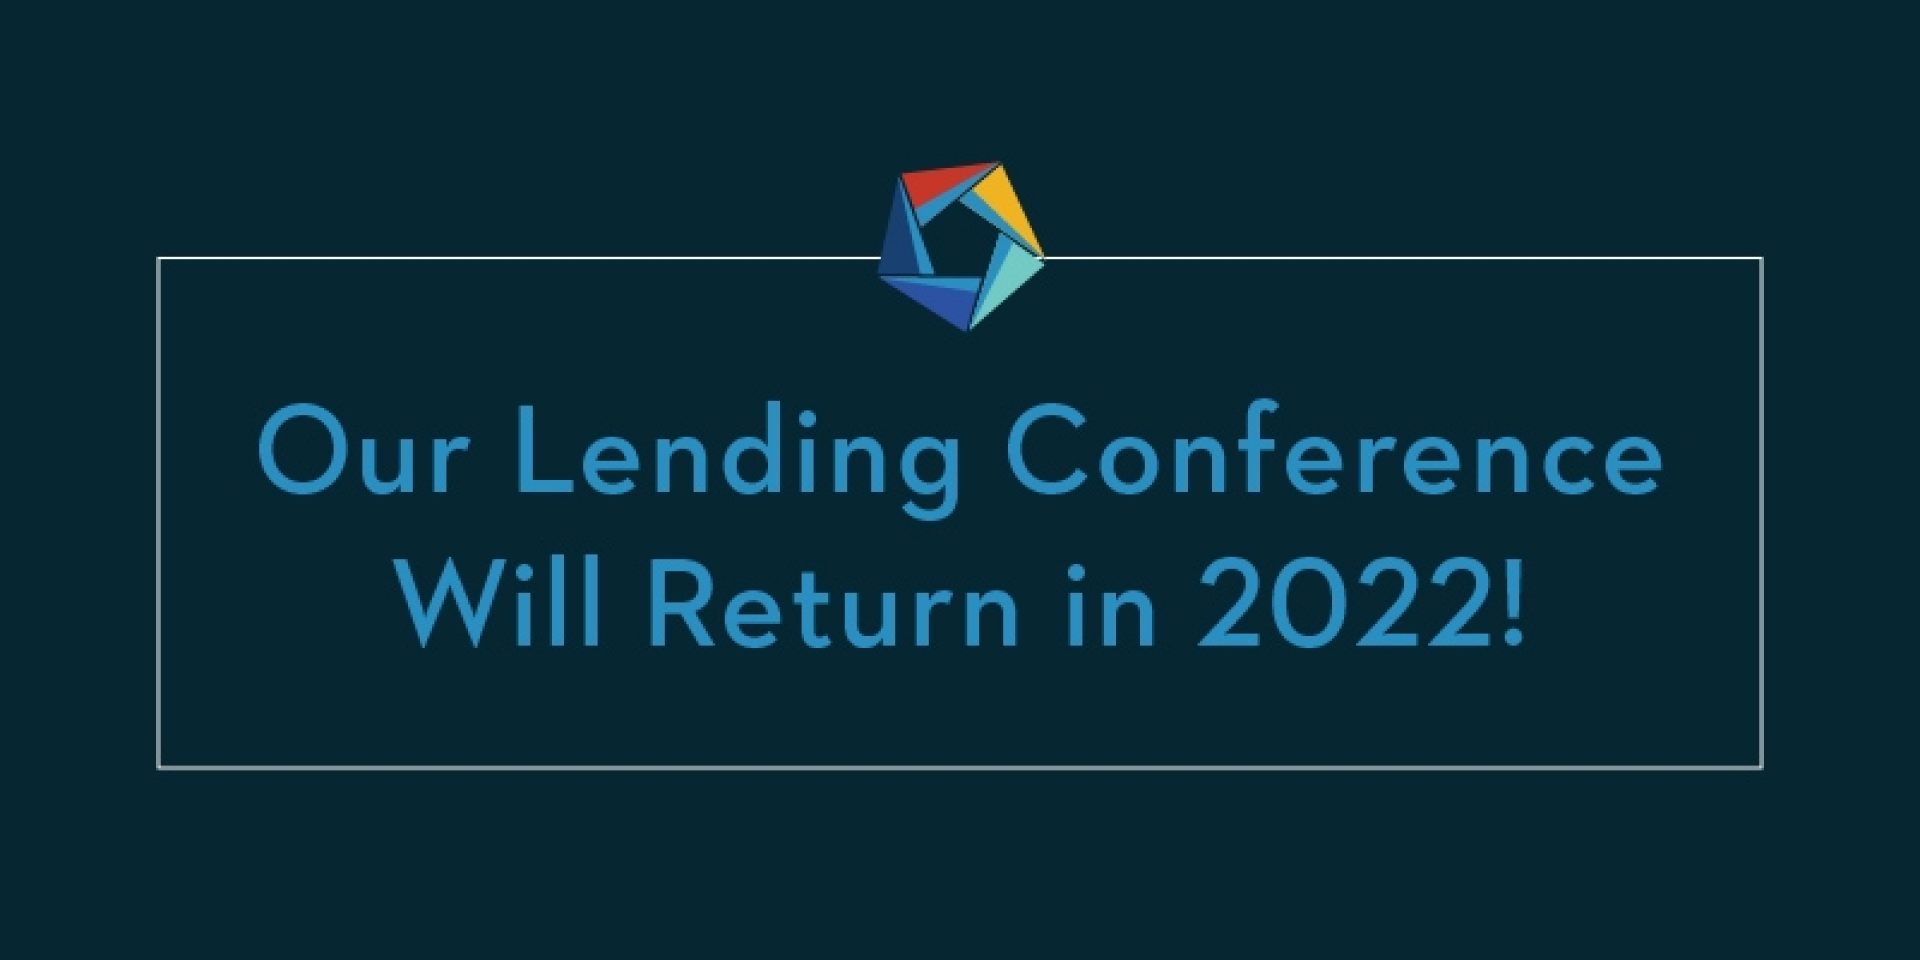 Our Lending Conference Will Return in 2022! The Servion Group